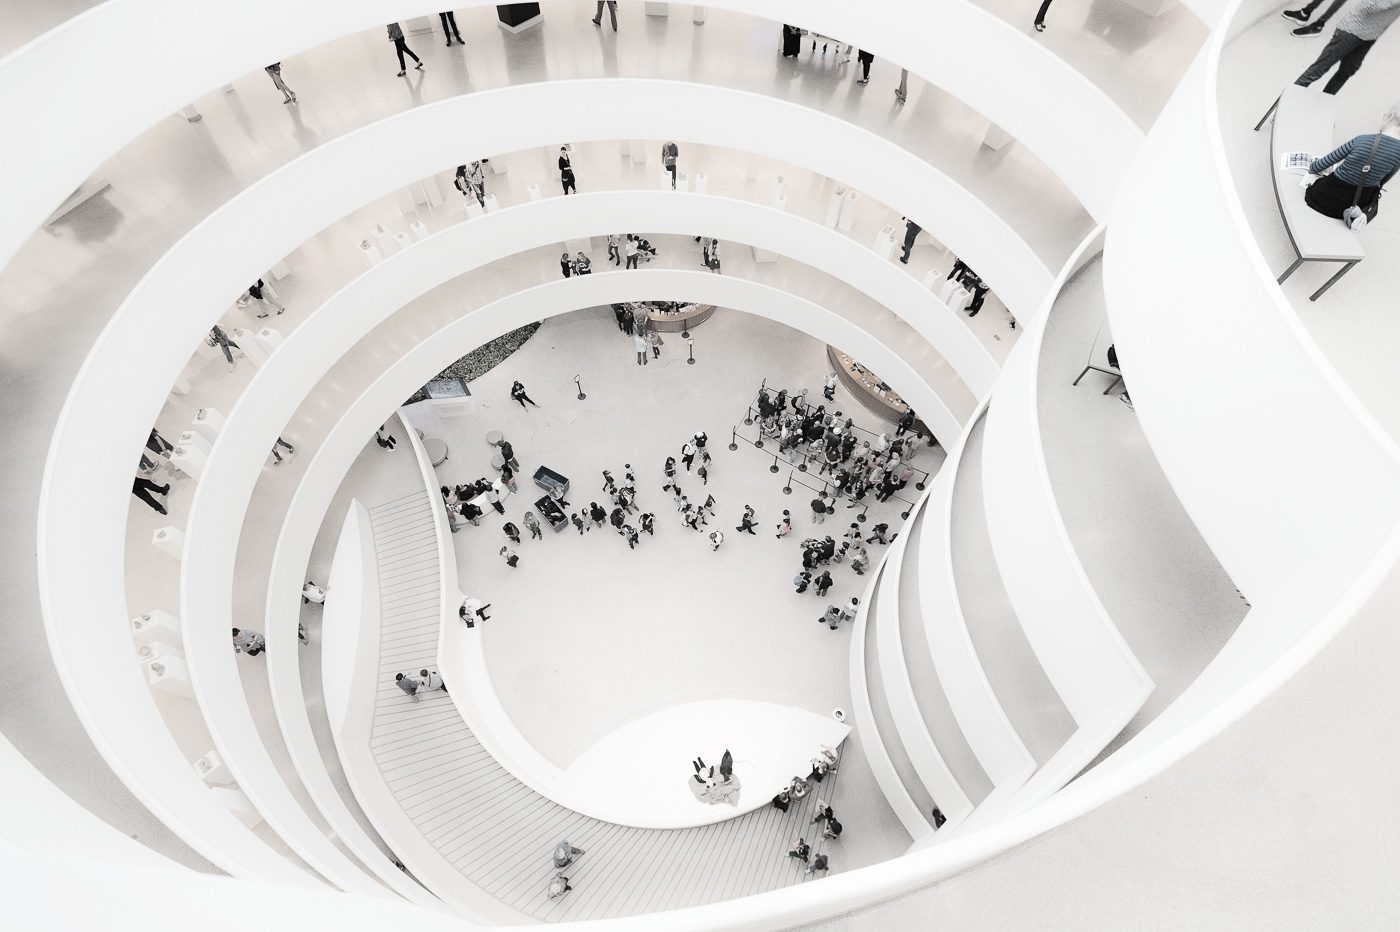 interior architectural image of Guggenheim museum, New York in